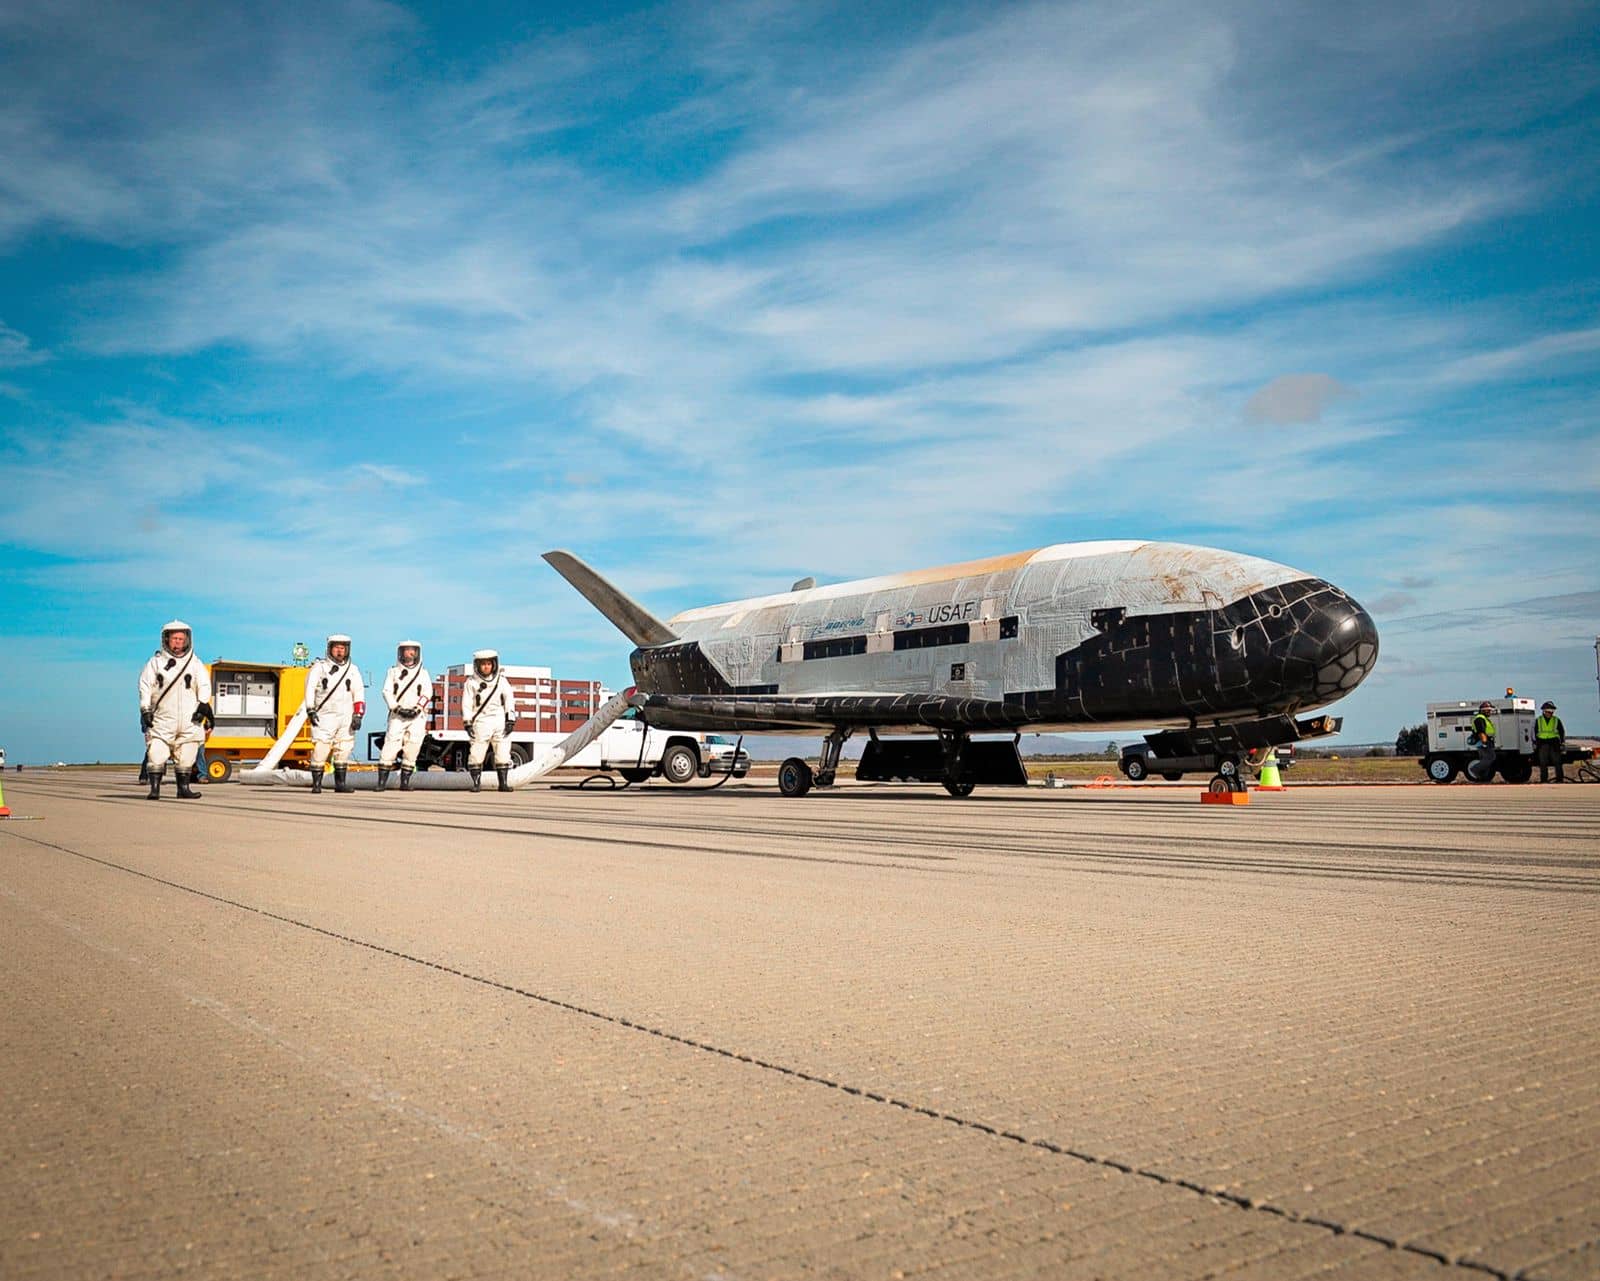 This Is How X-37B Can Disappear Without Leaving A Trace